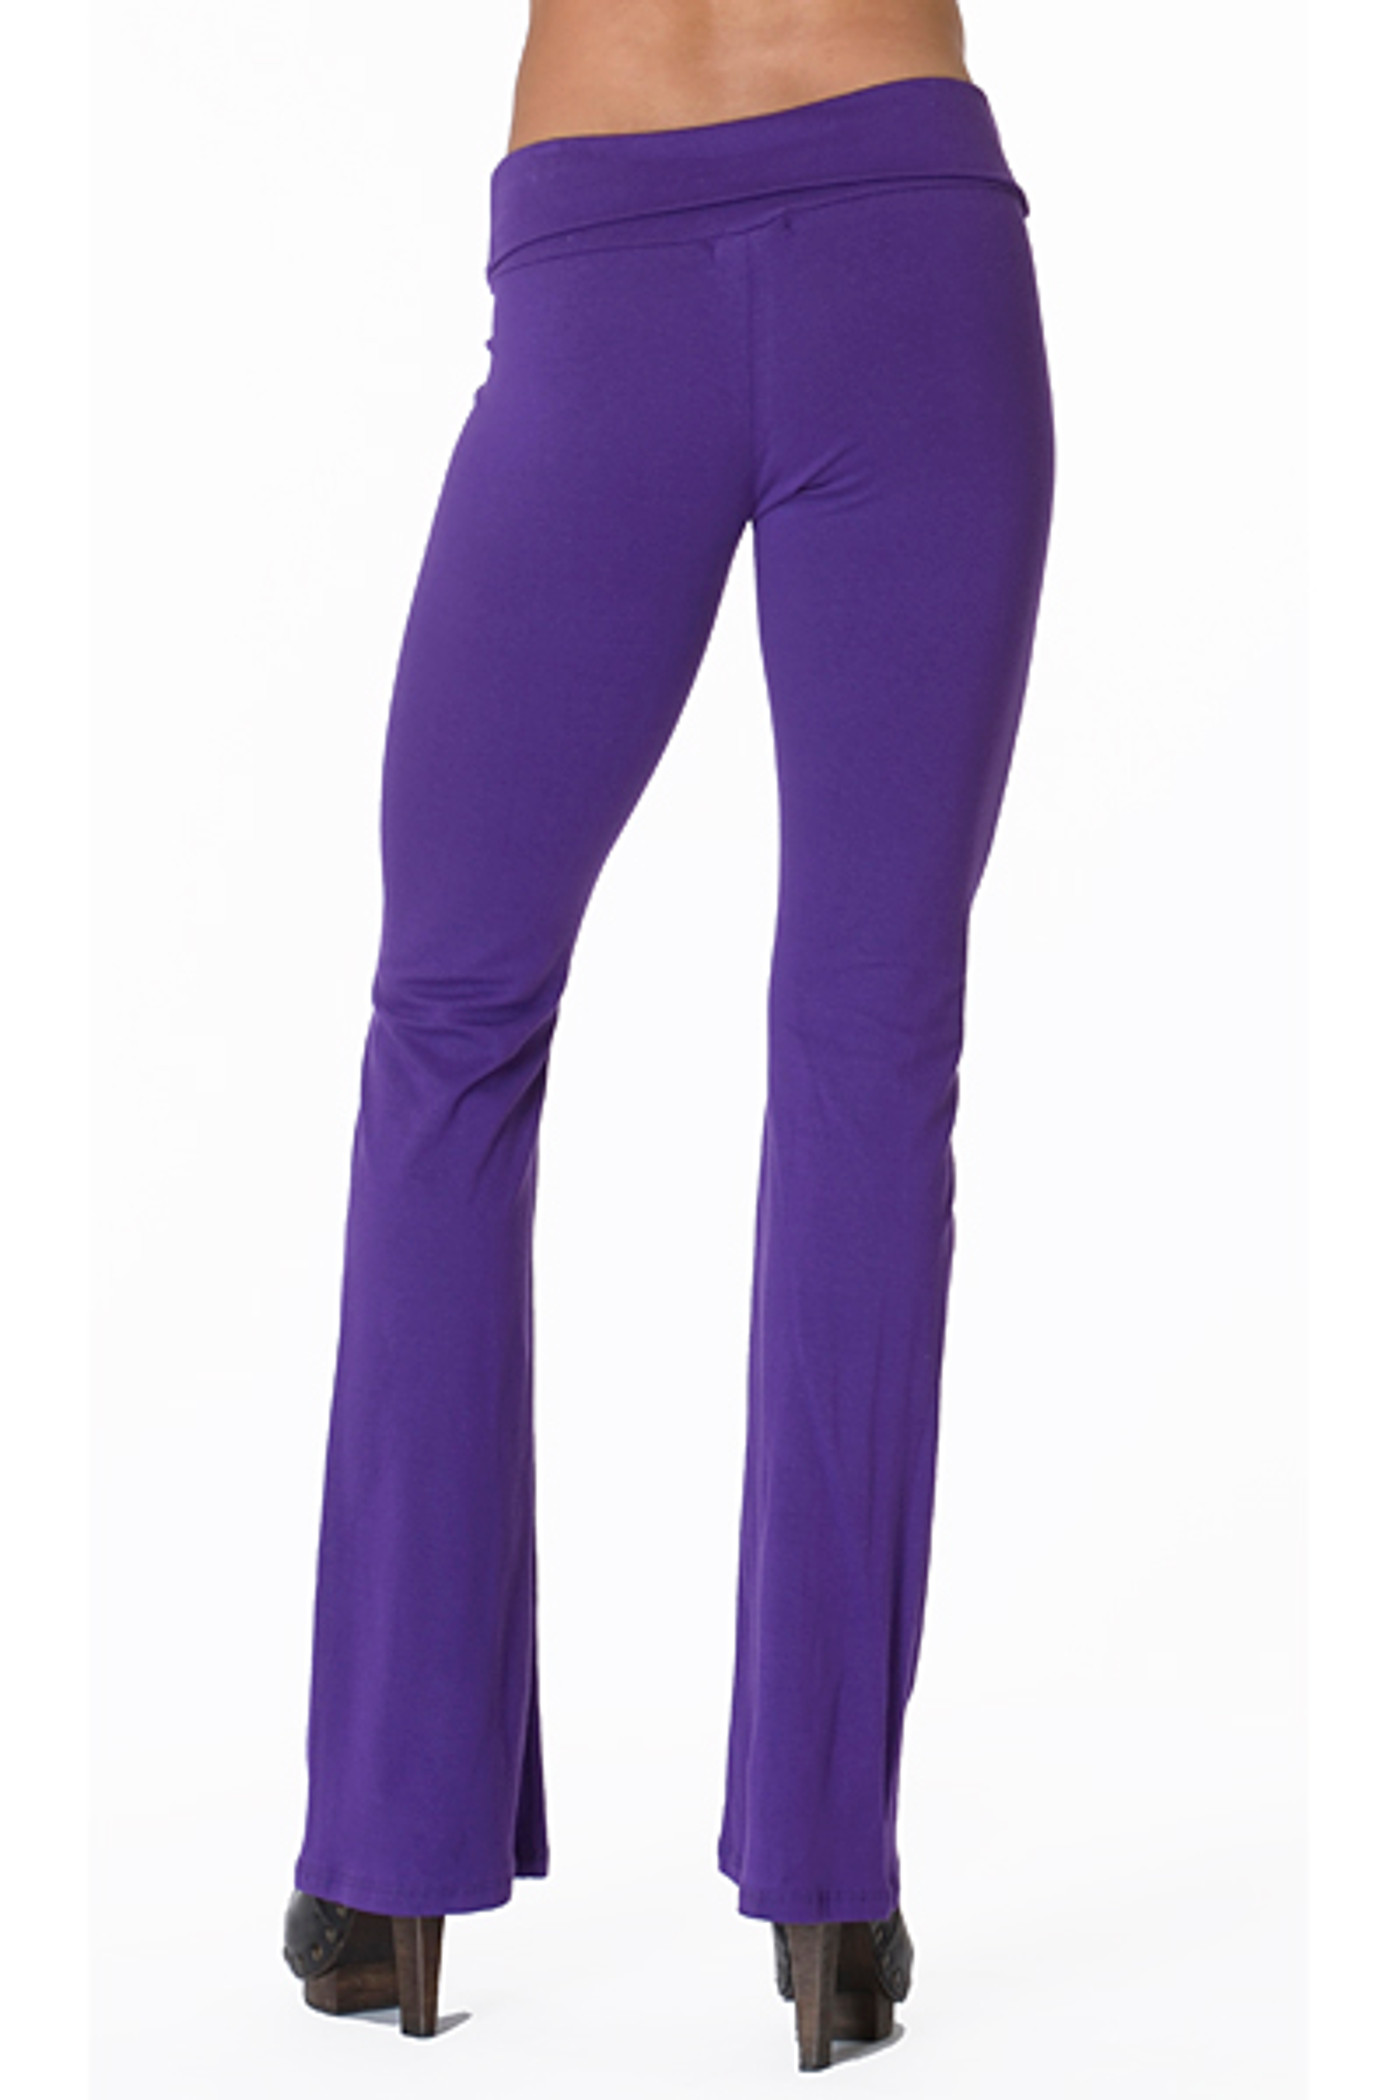 VSPINK cotton foldover flare leggings!! THANK ME LATER. size xs